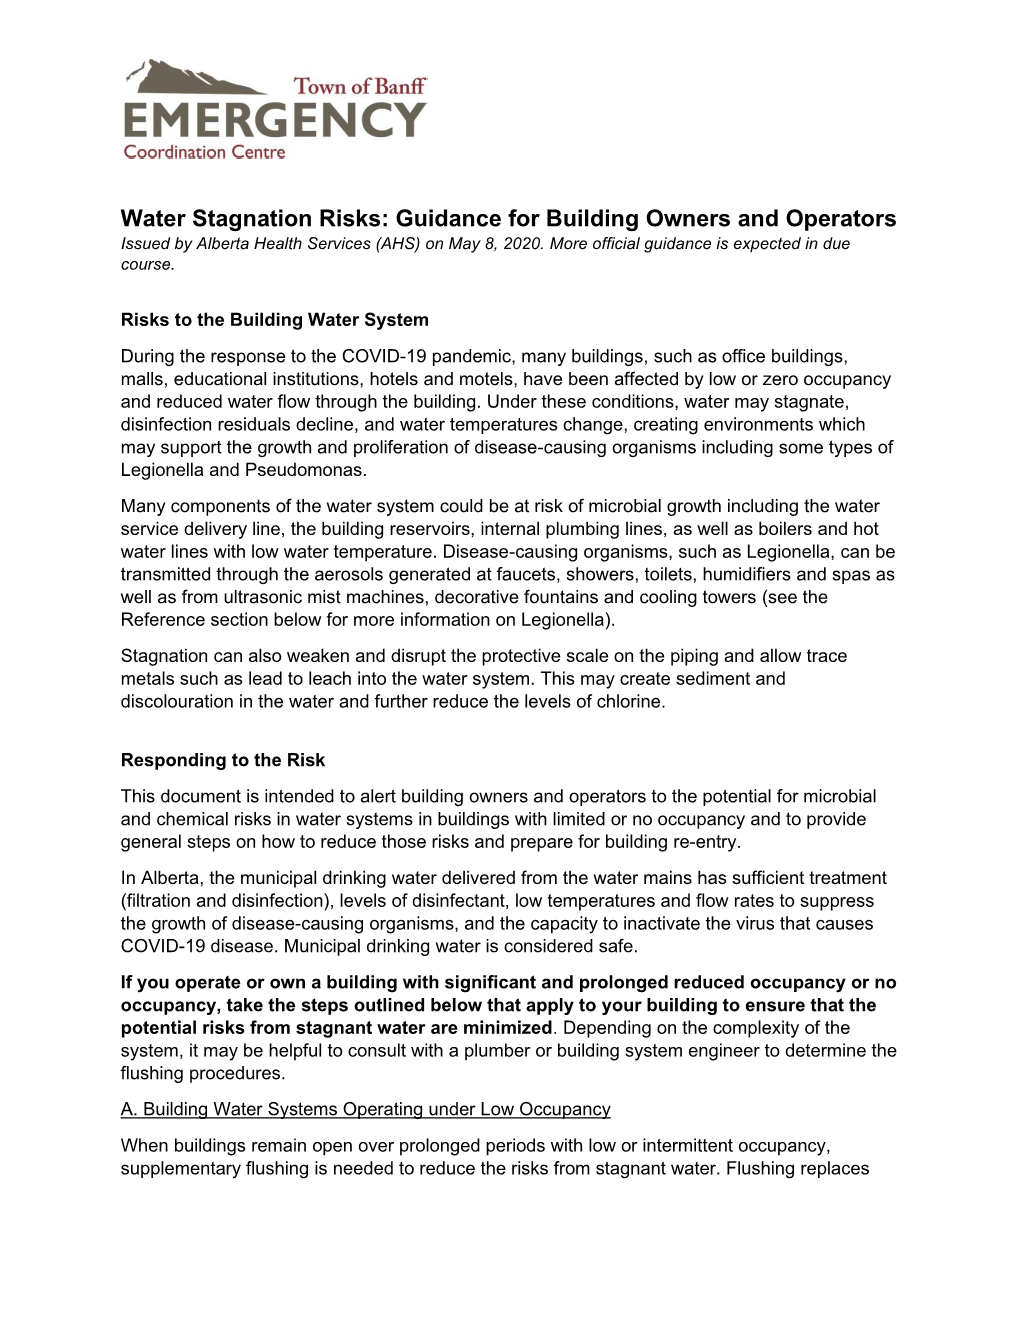 Water Stagnation Risks: Guidance for Building Owners and Operators Issued by Alberta Health Services (AHS) on May 8, 2020